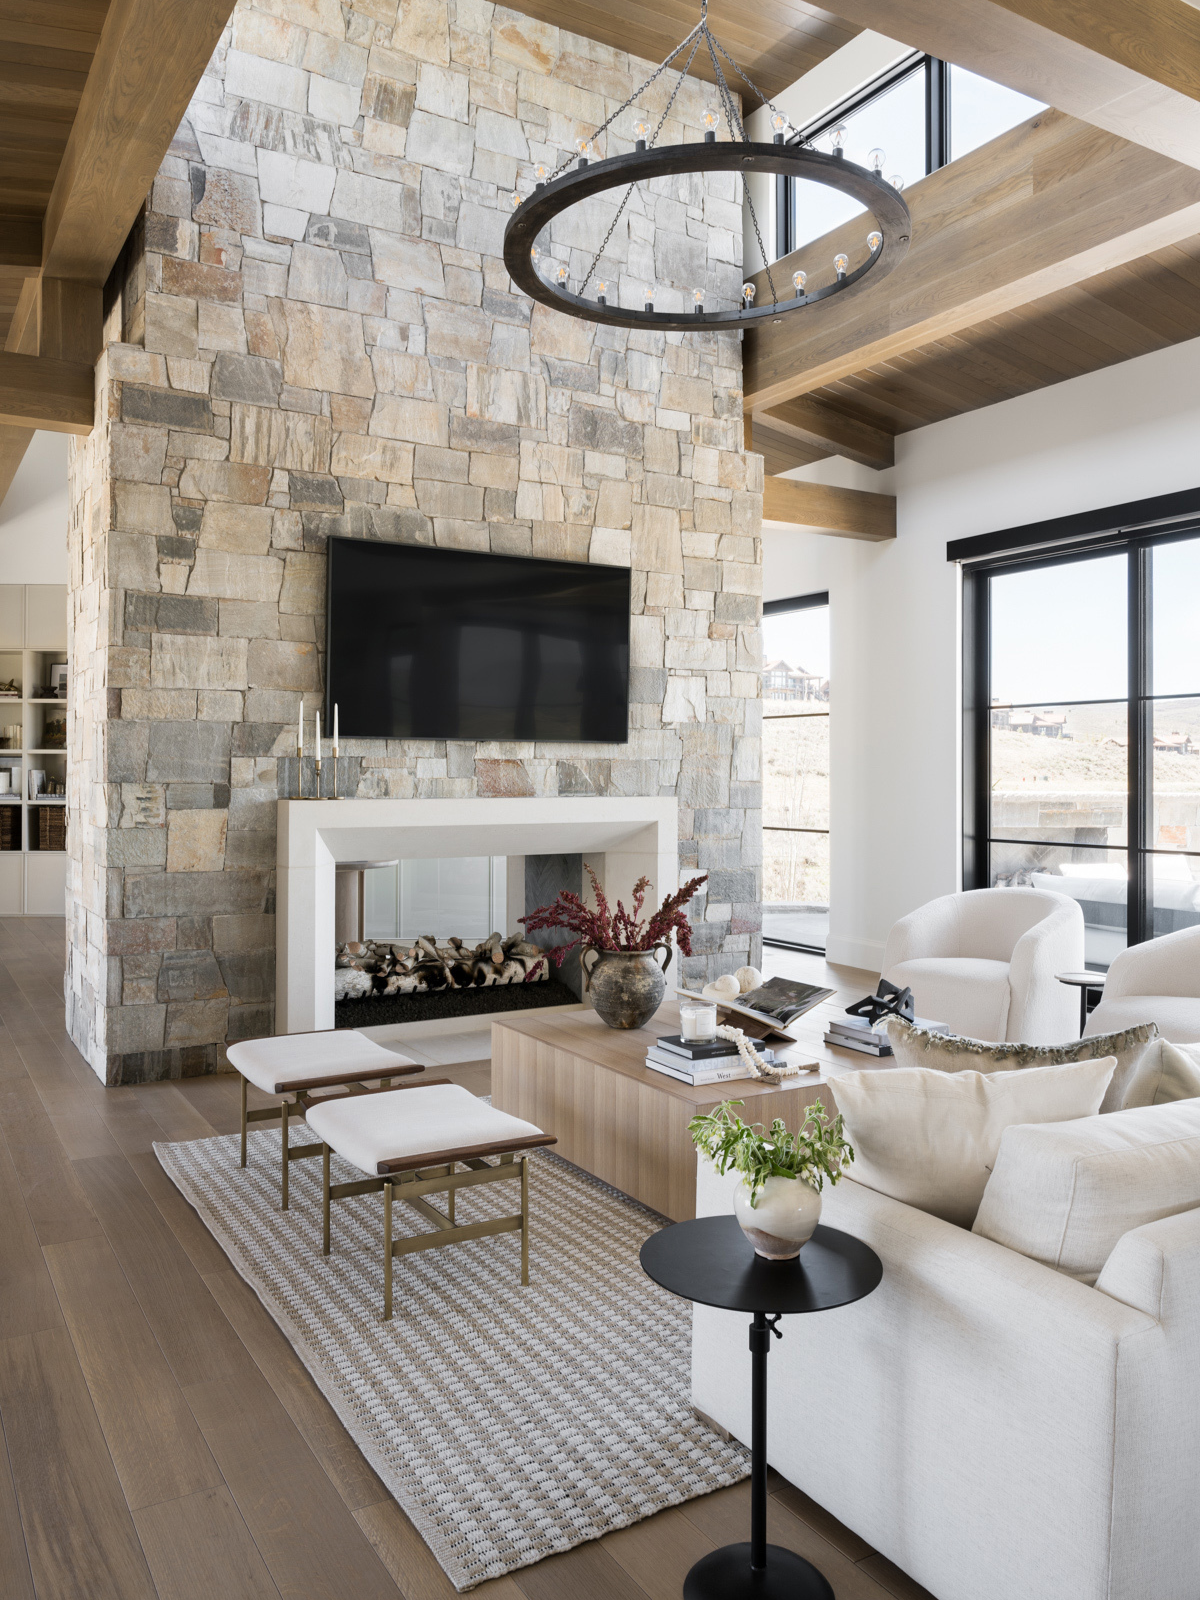 a living room showing giant fireplace with stone finish, wooden flooring finish, white upholstered couch and round chandelier